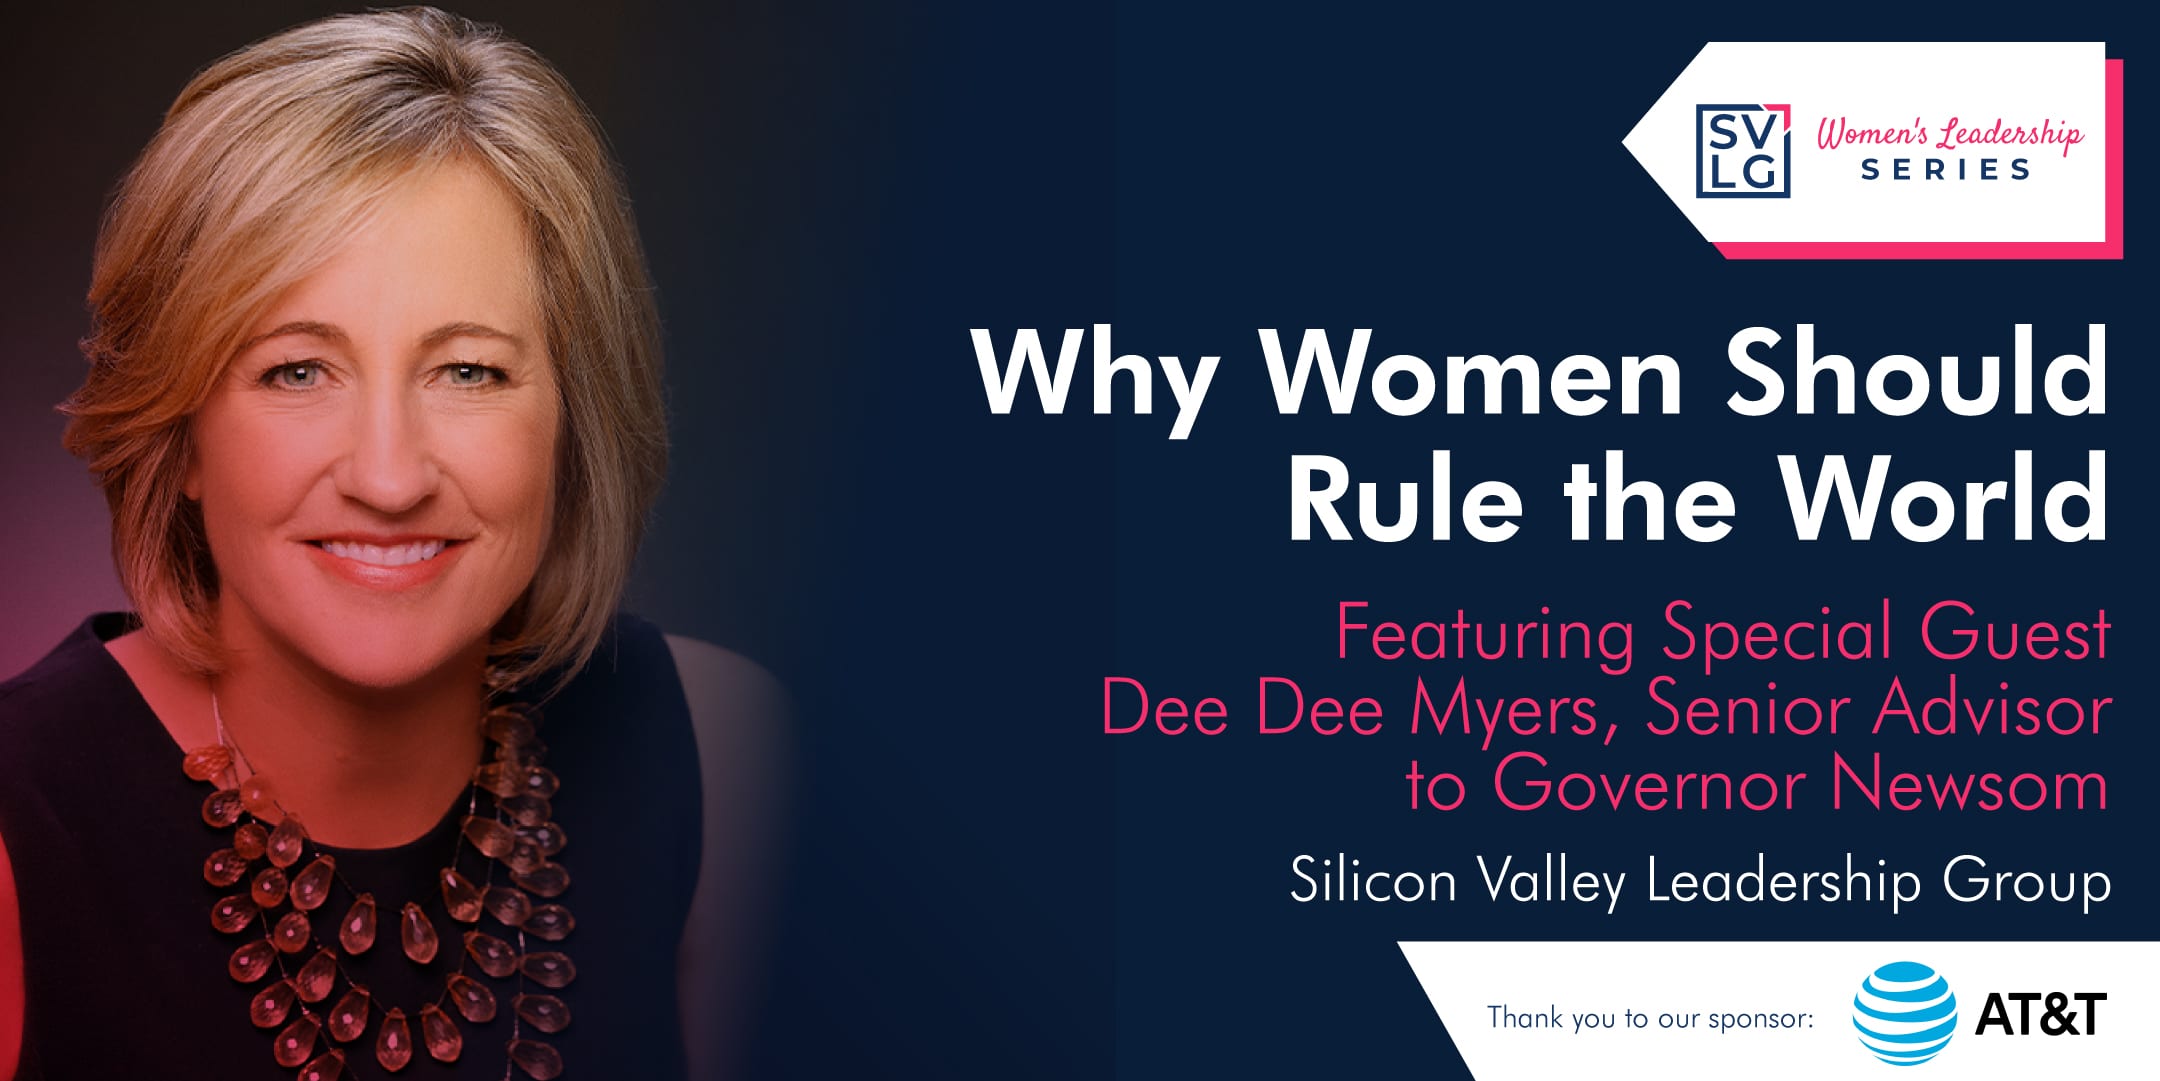 Why Women Should Rule the World - Silicon Valley Leadership Group